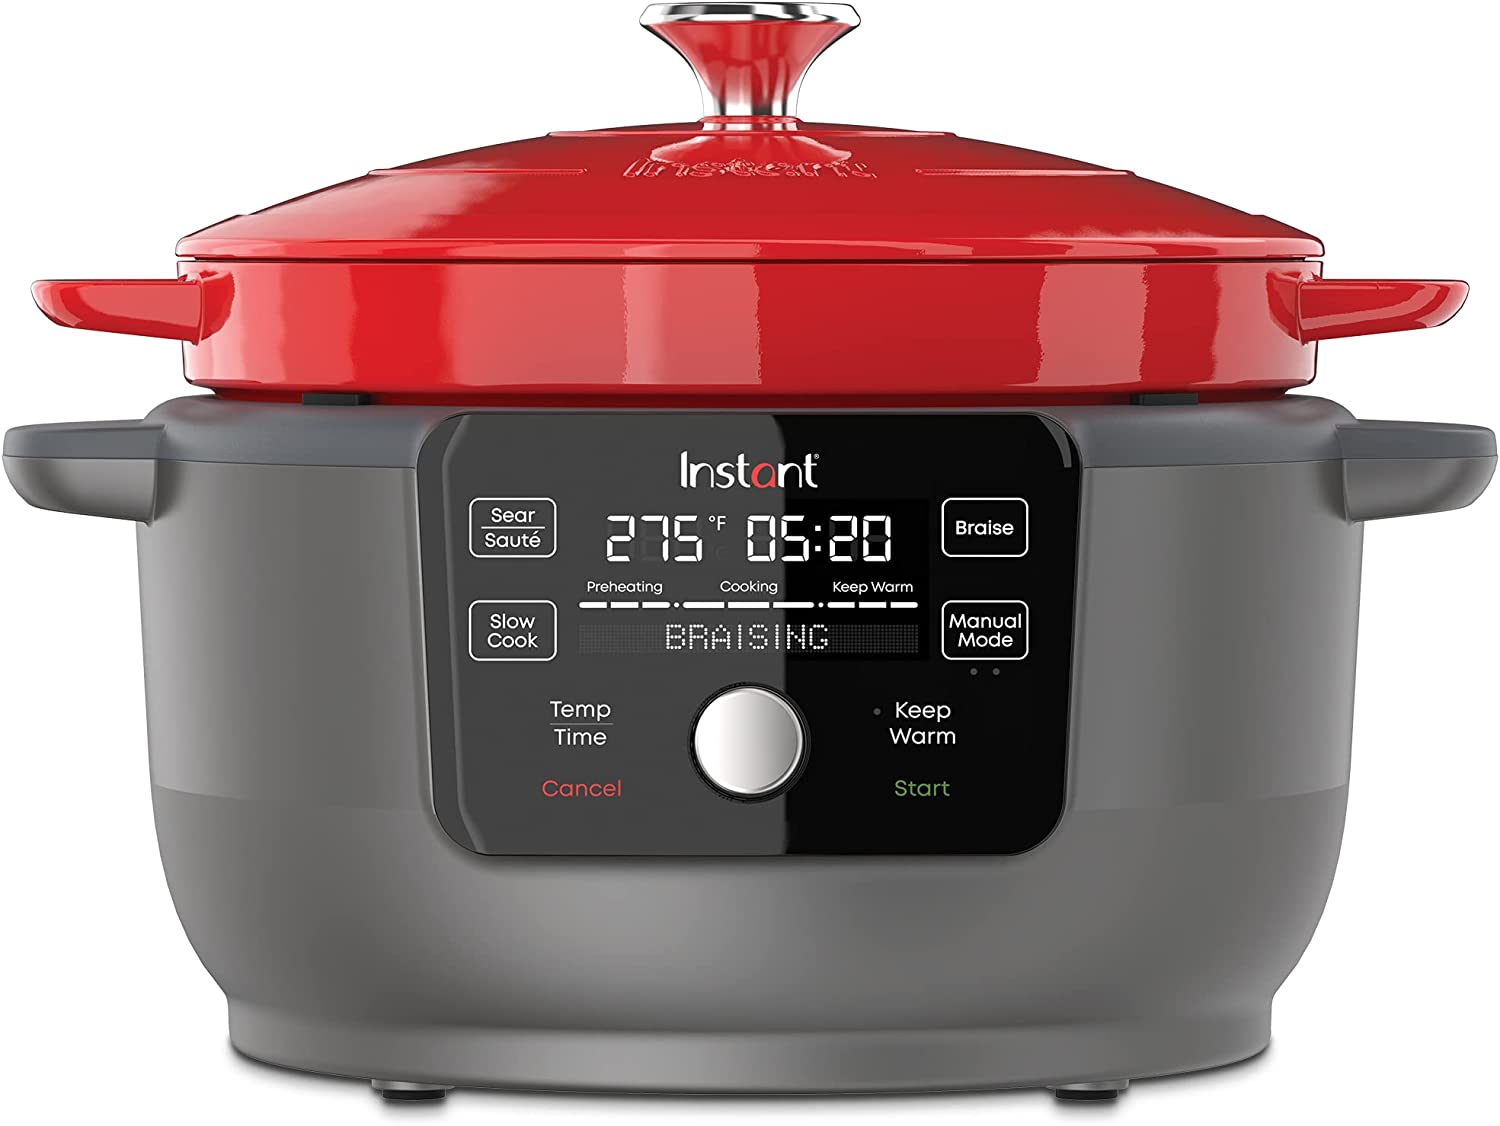 Instant 6-Quart 1500W 5-in-1 Electric Round Dutch Oven (Red) $89.37 + Free Shipping